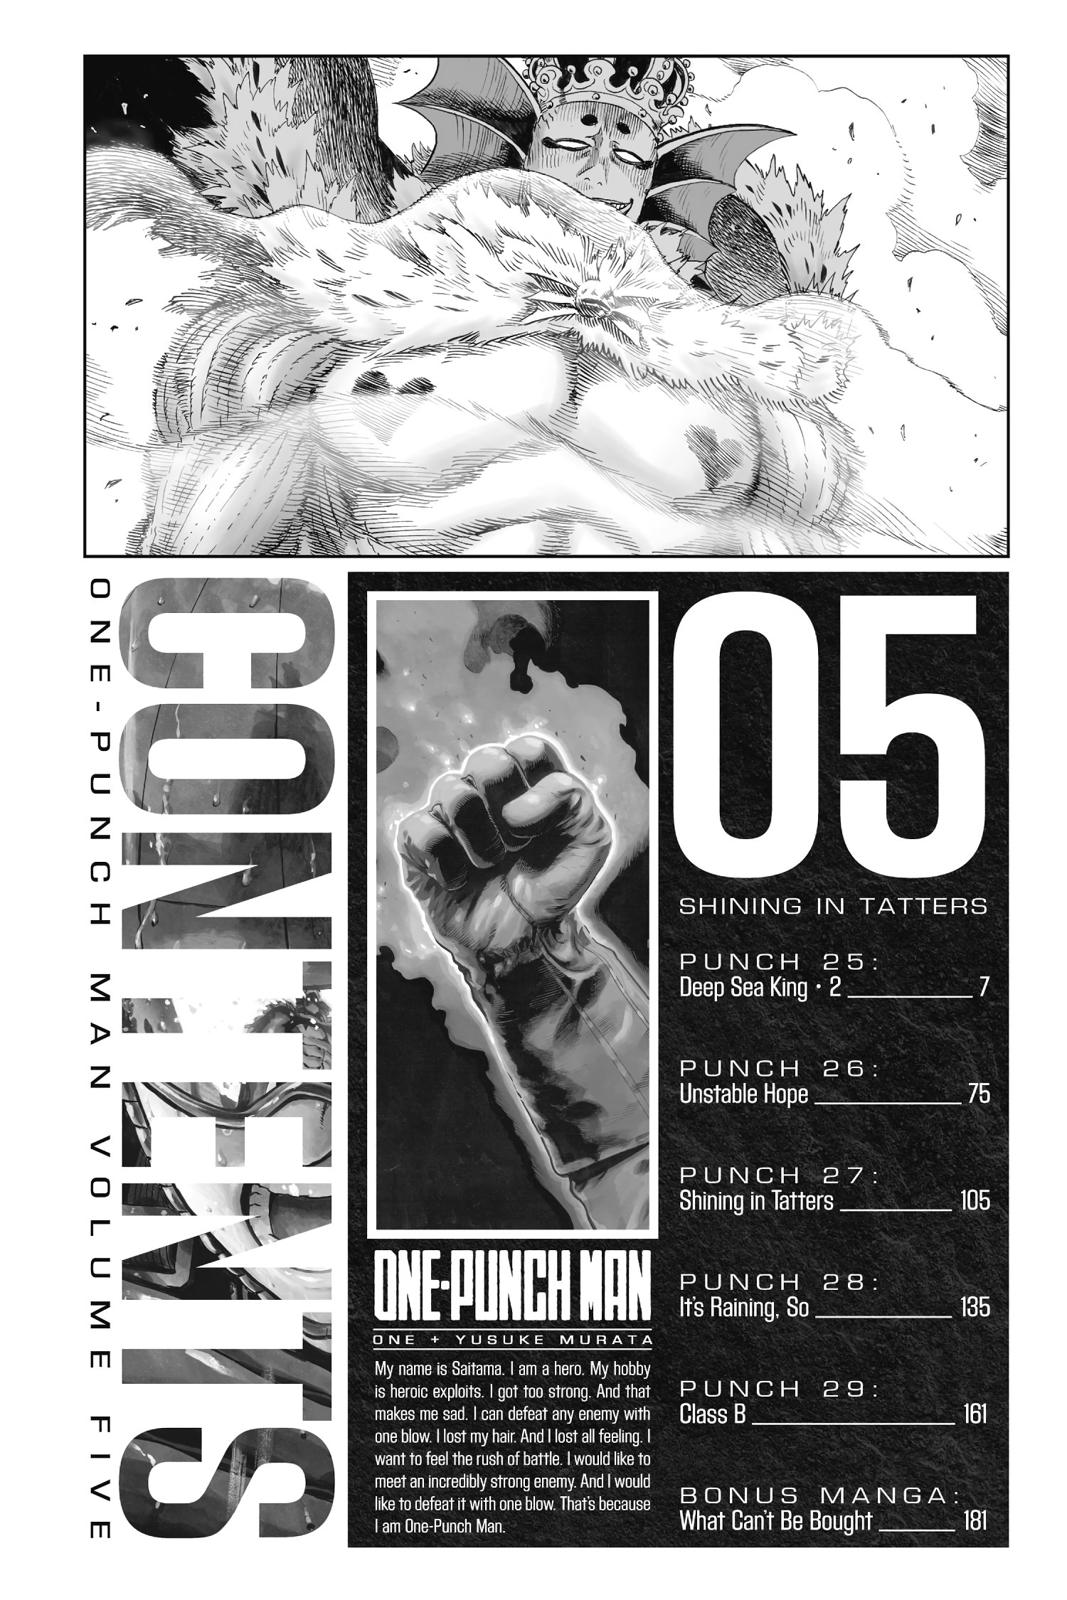 One-Punch Man, Punch 25 image 06